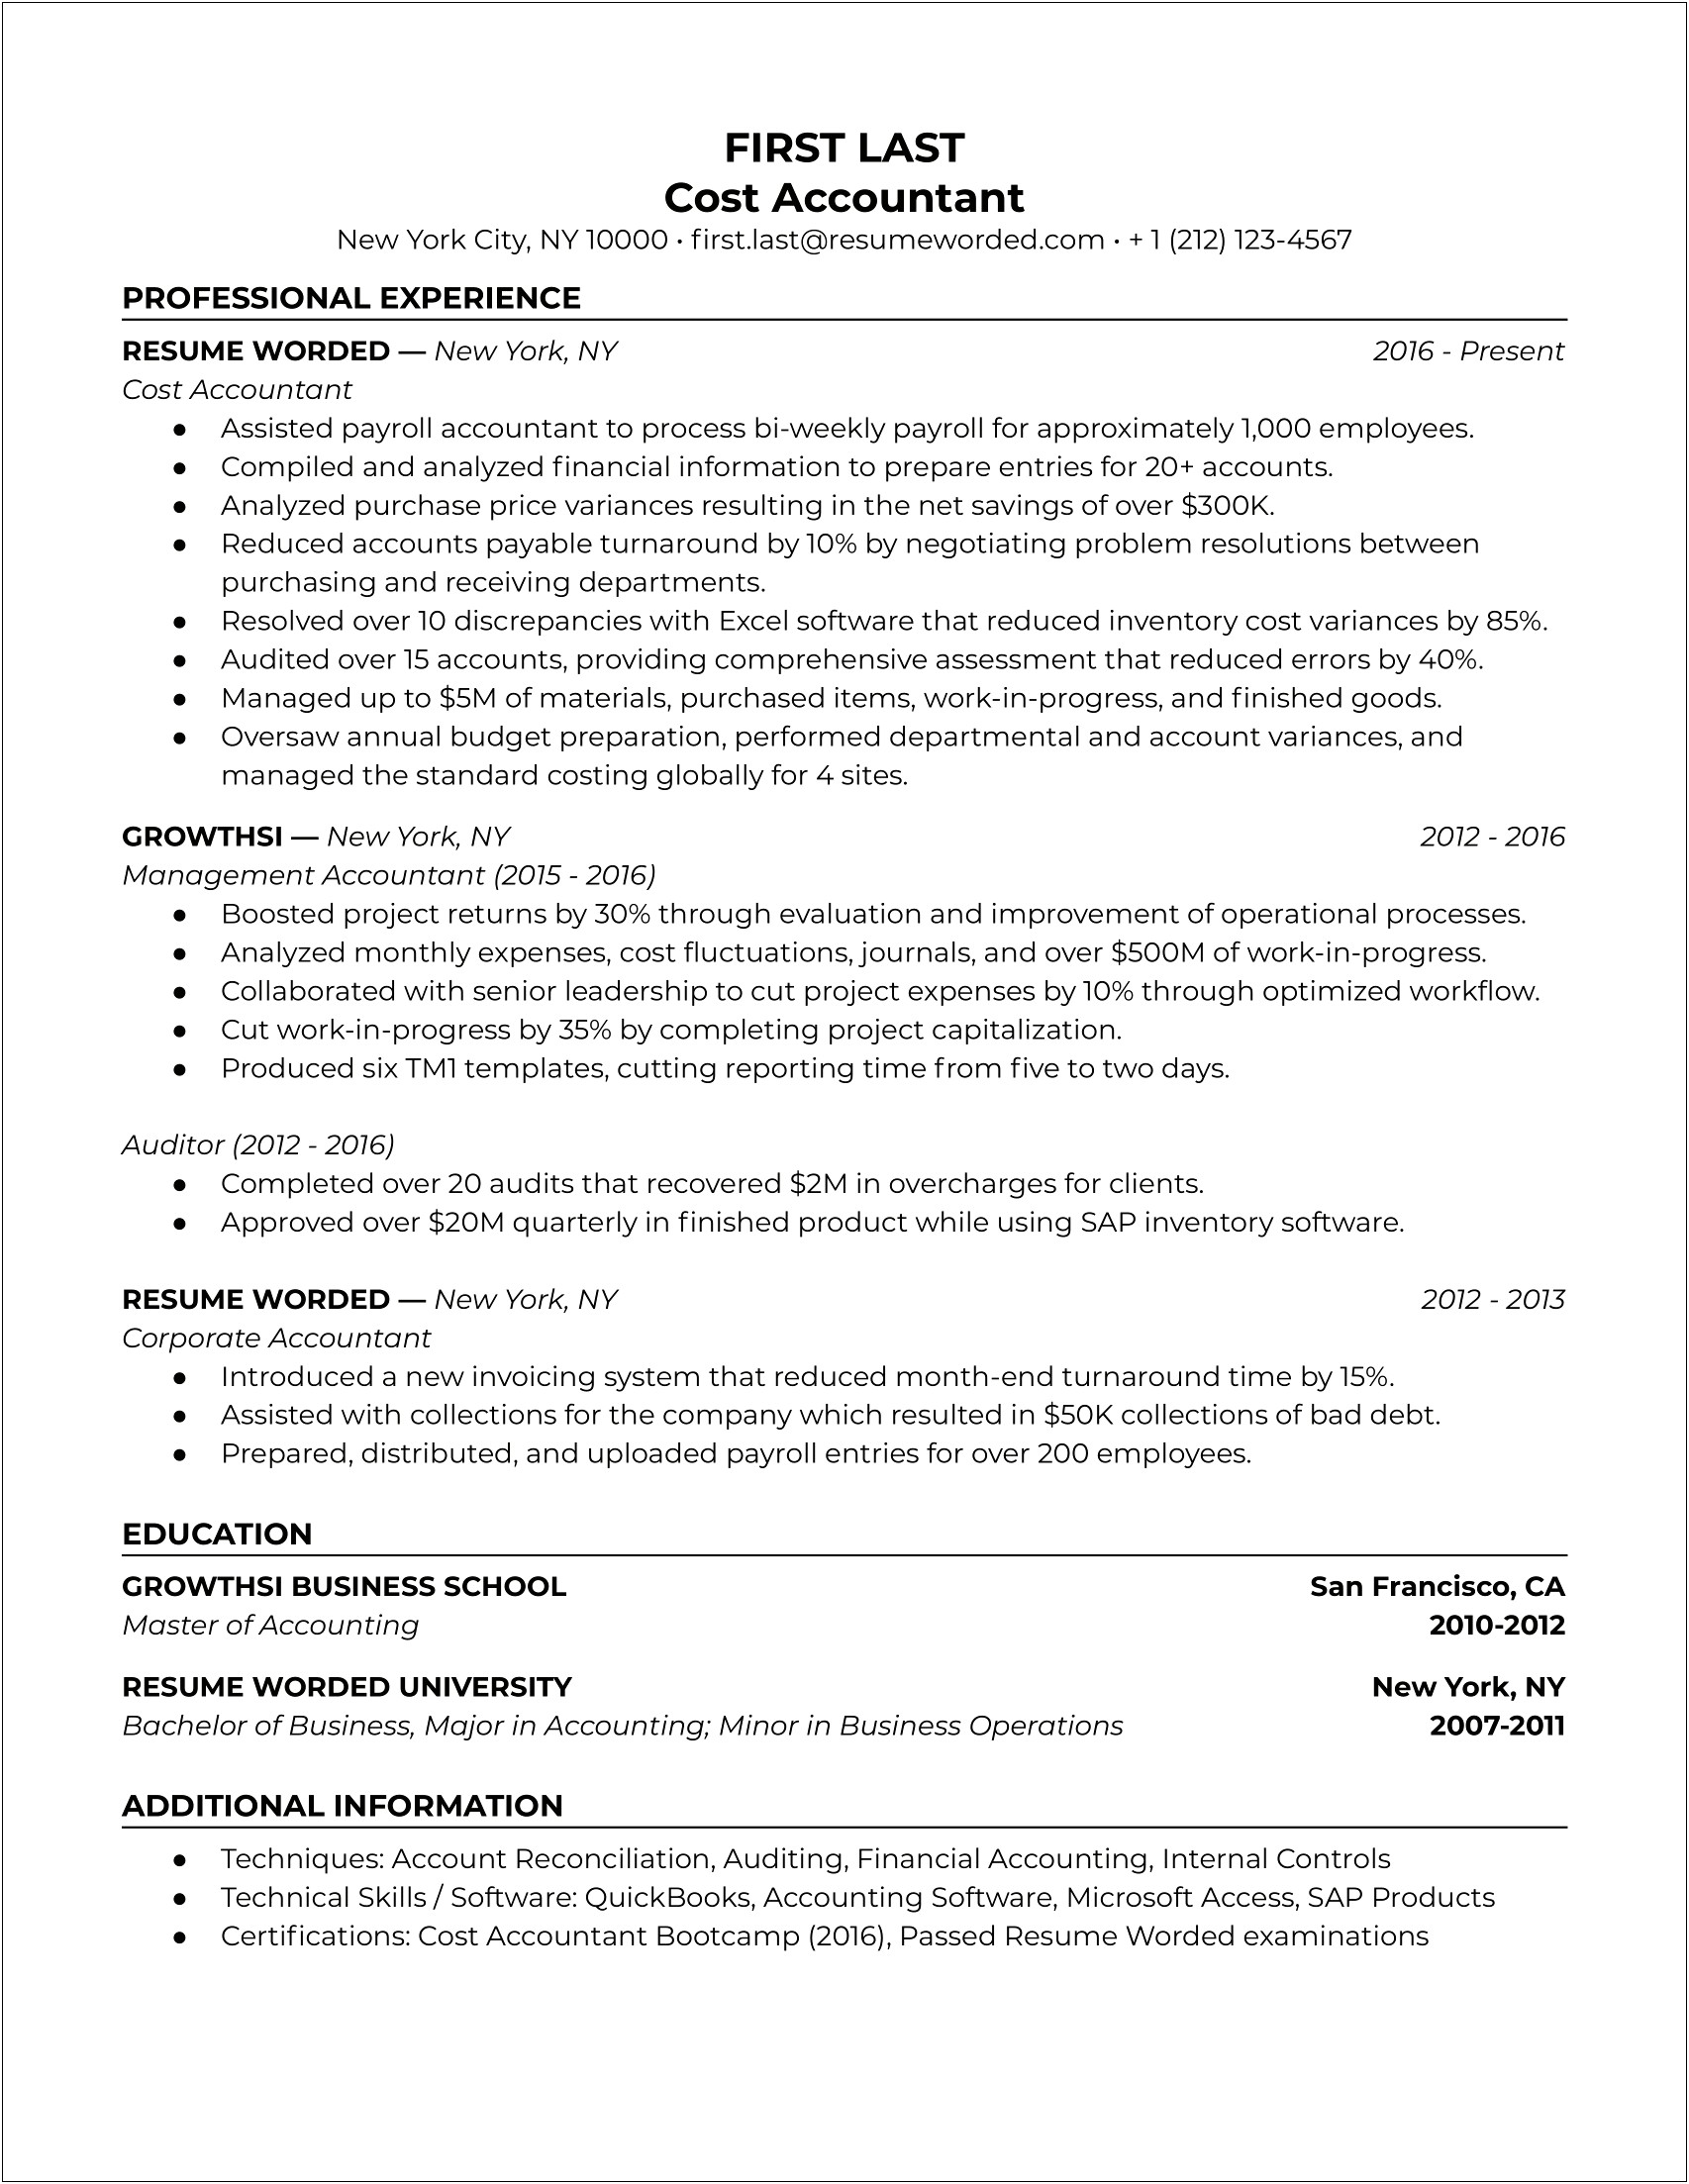 Best Resume For Entry Level Accountant